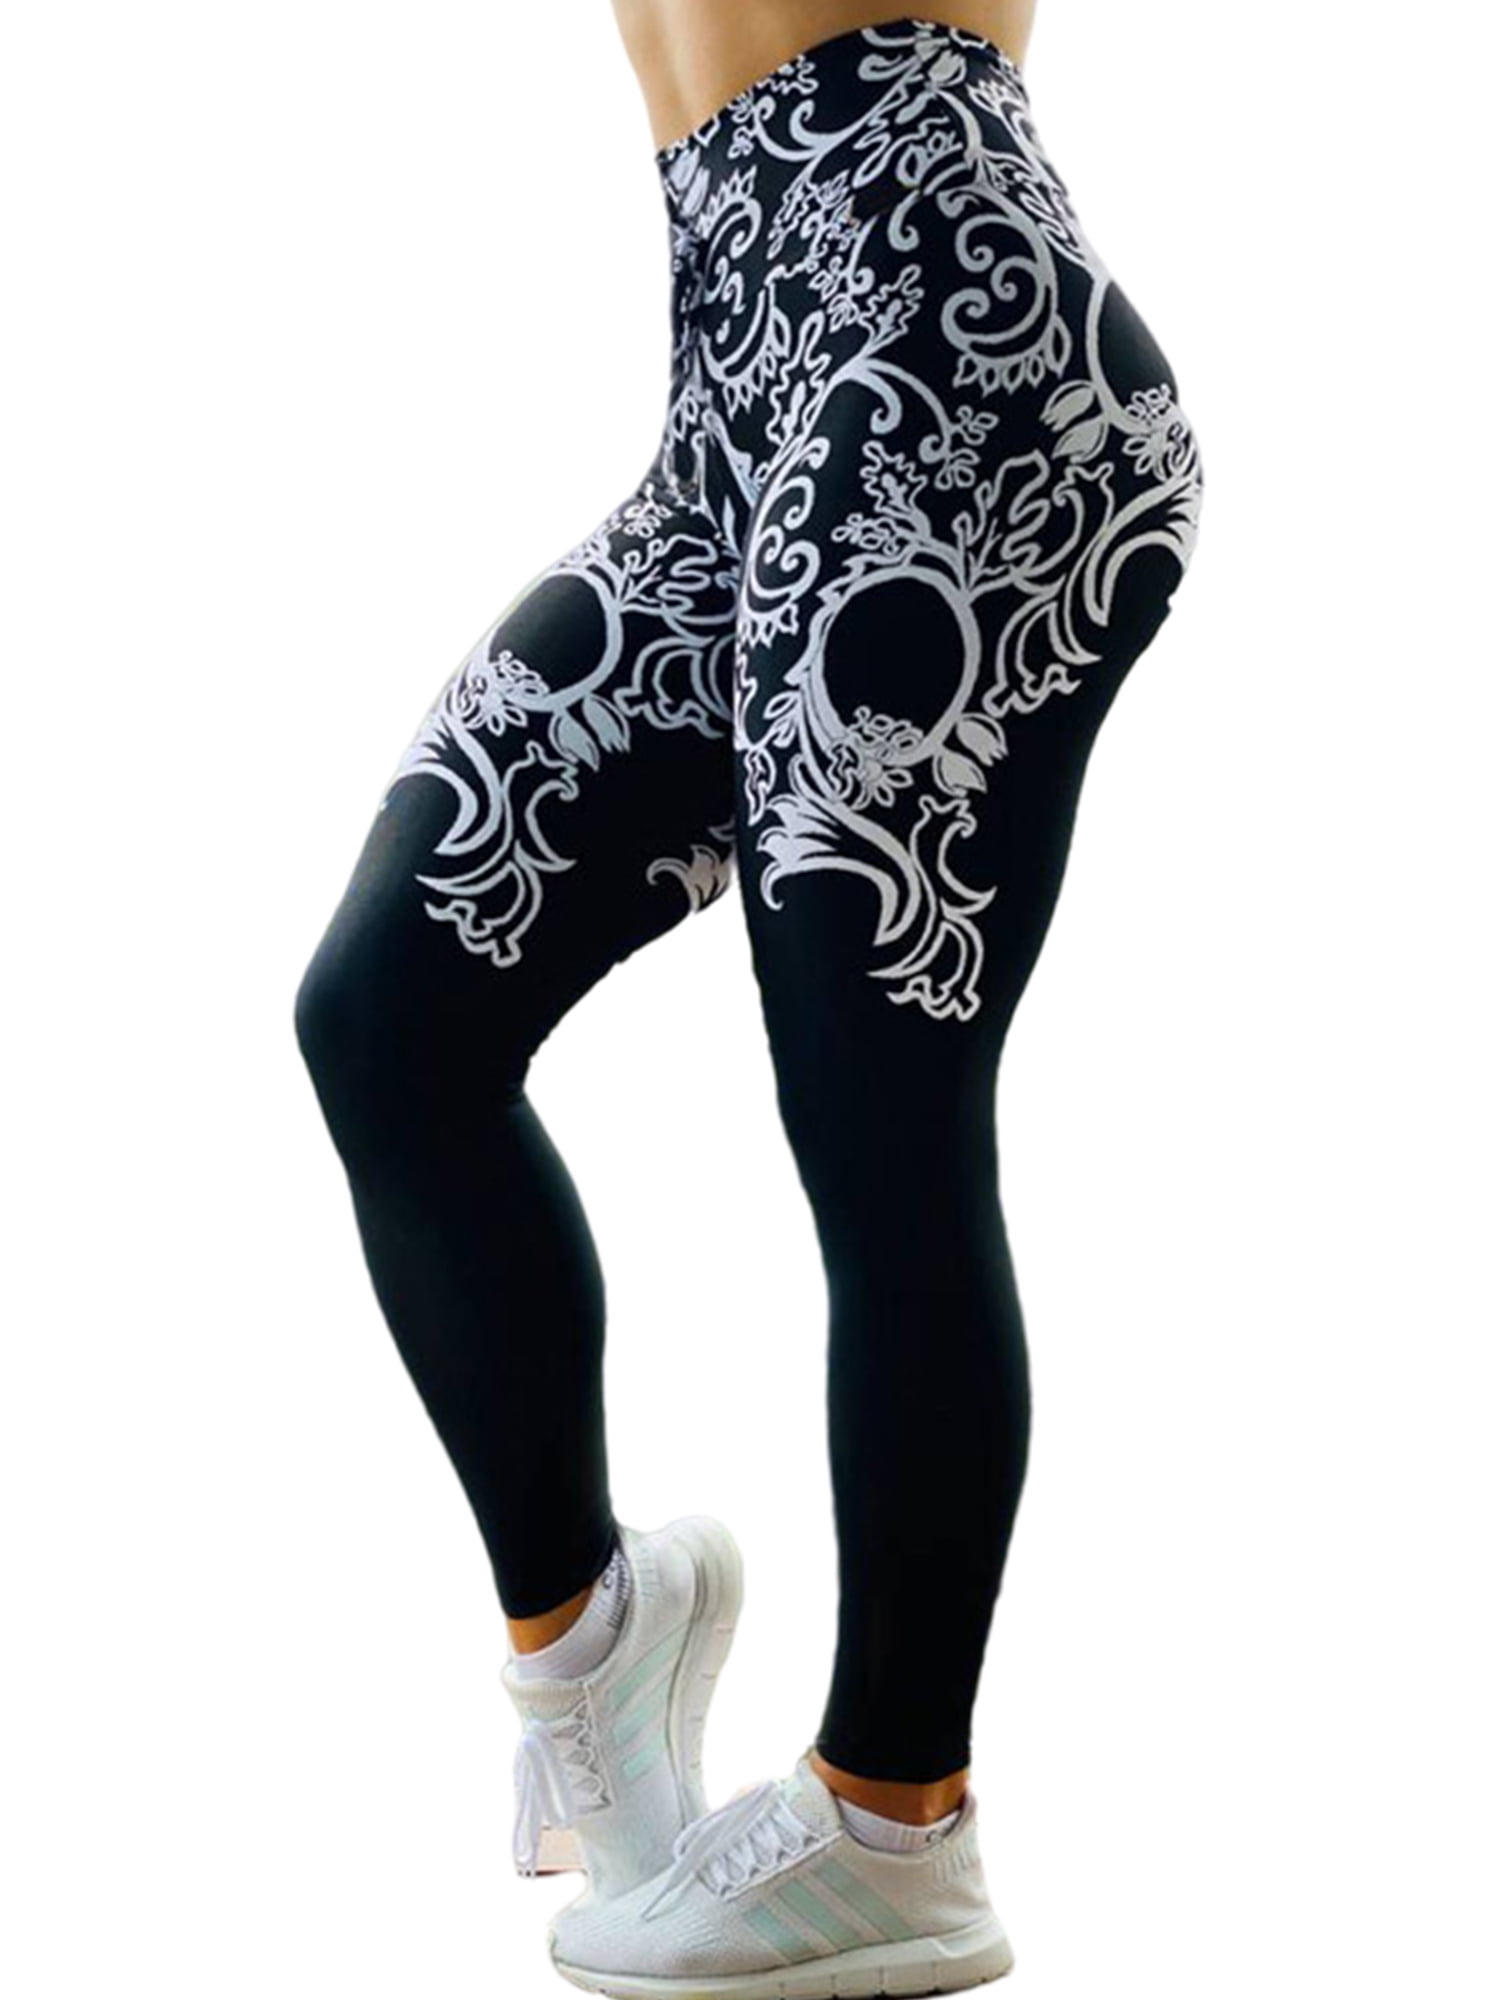 Details about   Women High Waist Yoga Pants Fitness Push Up Print Trousers Leggings Stretch Gym 